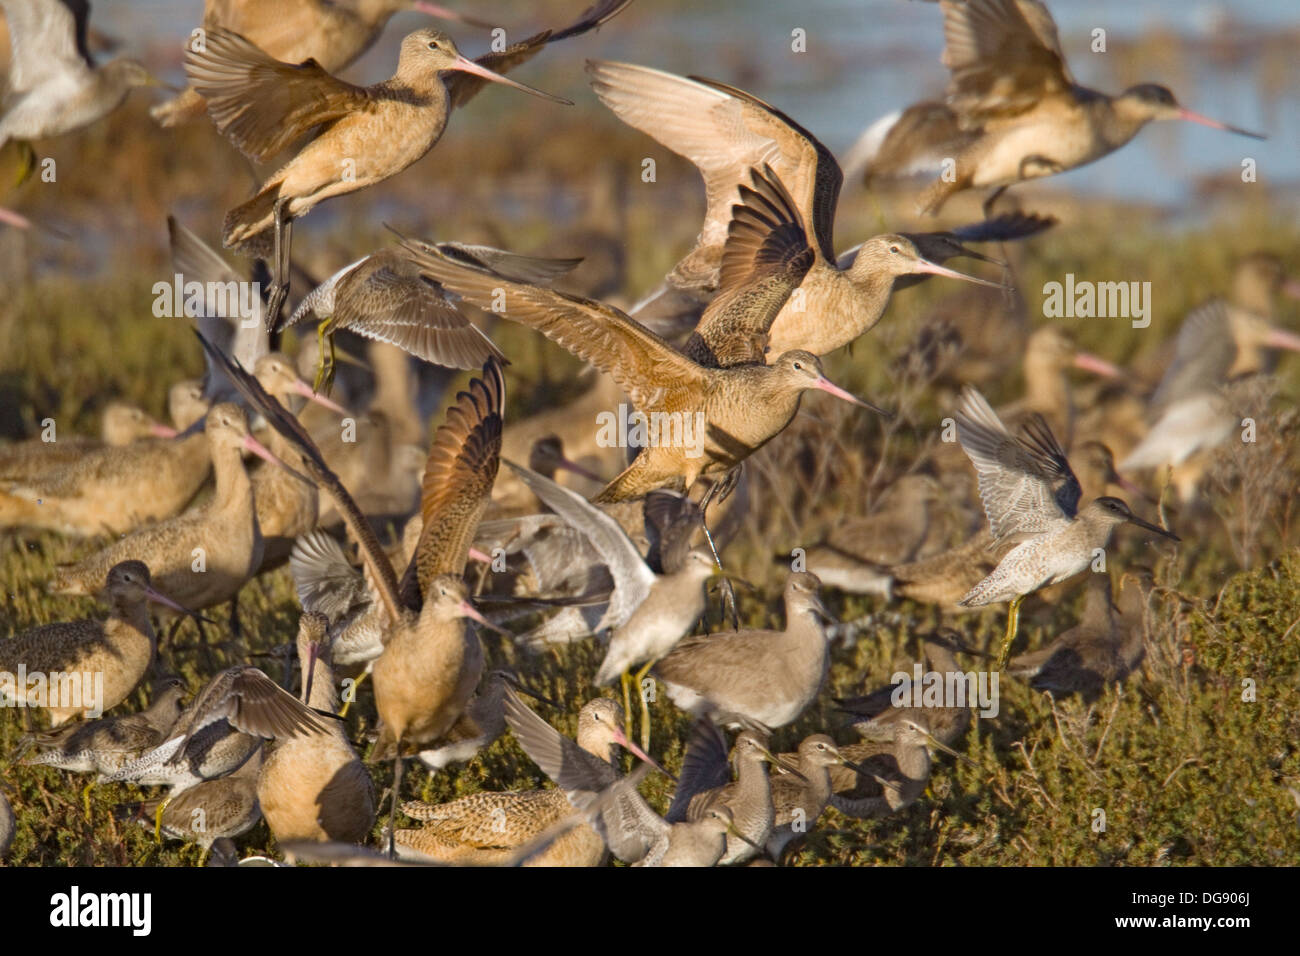 .Shore birds taking off including Marbled Godwits and Dowitchers.(Limosa Fedoa and Limnodromus sp.).Back Bay Reserve, California. Stock Photo